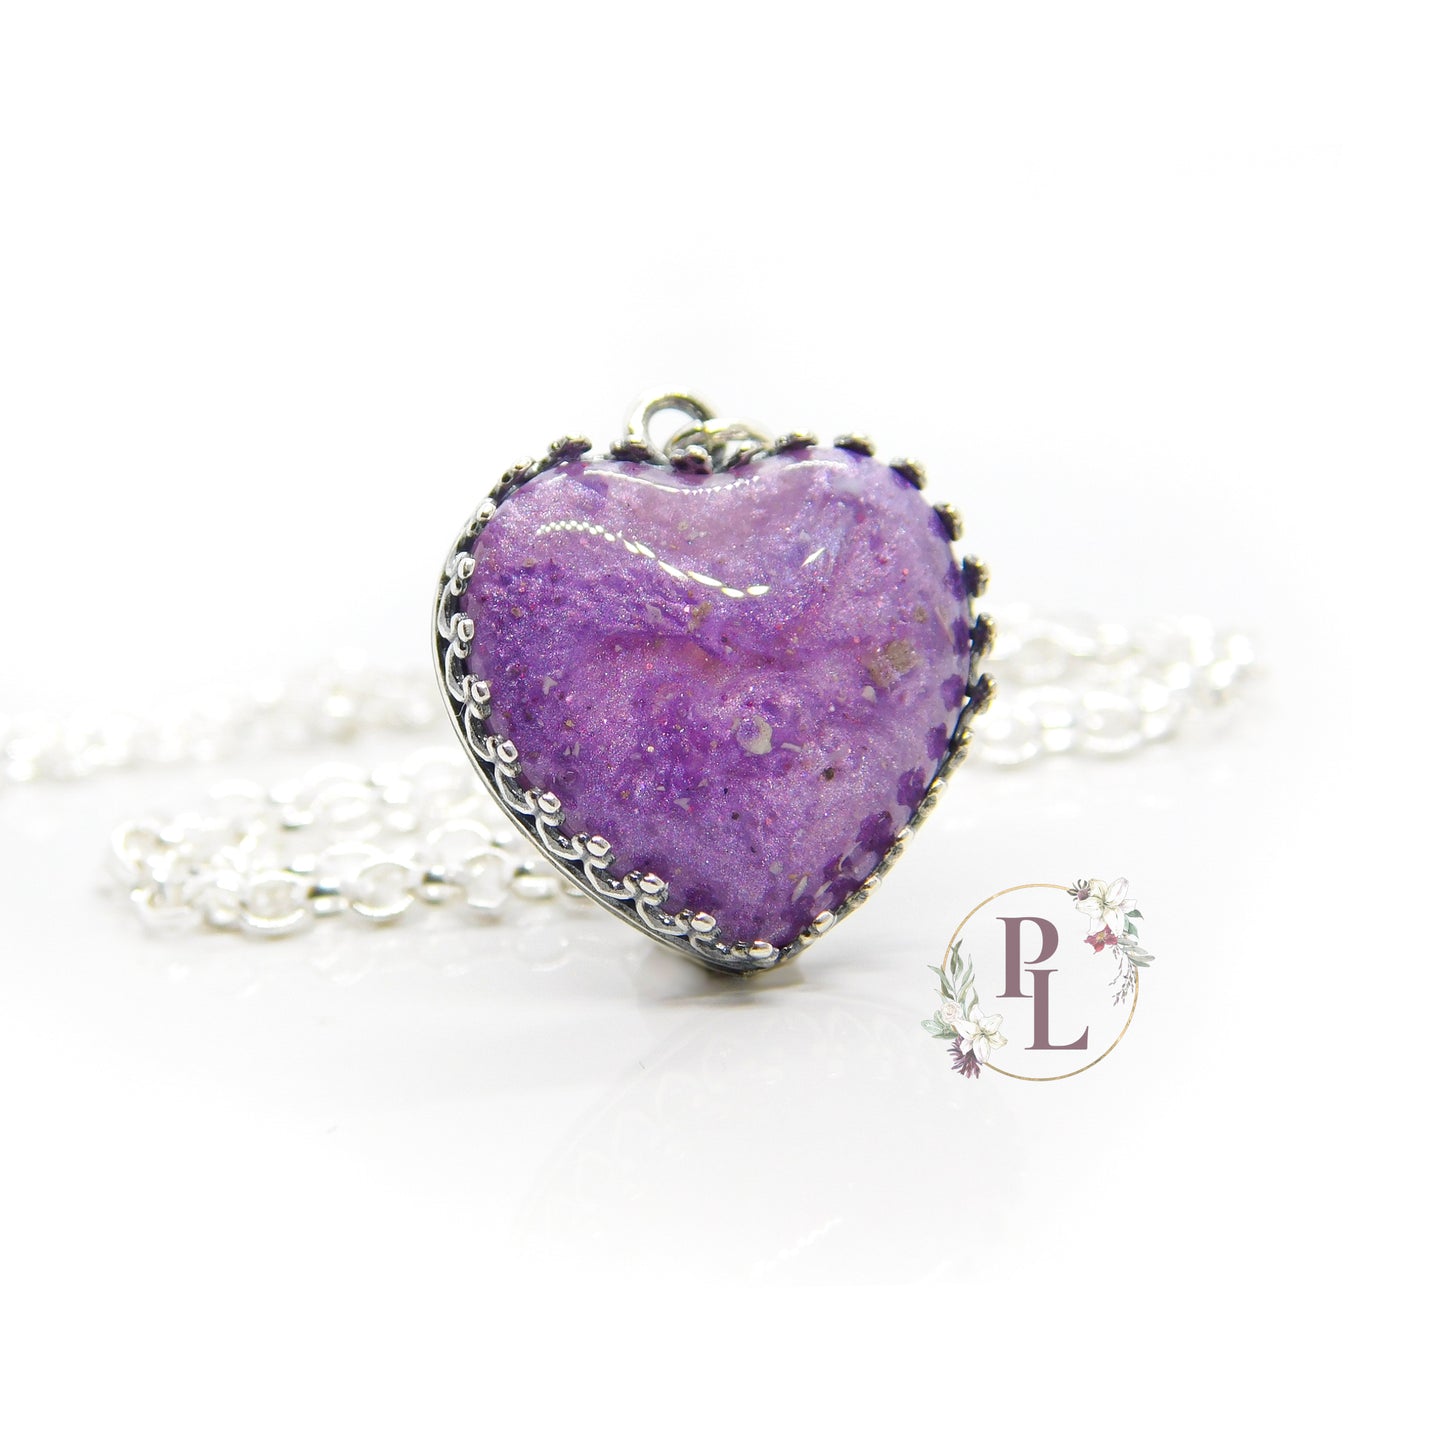 Adeline - Crowned Heart Cremation Ash Necklace